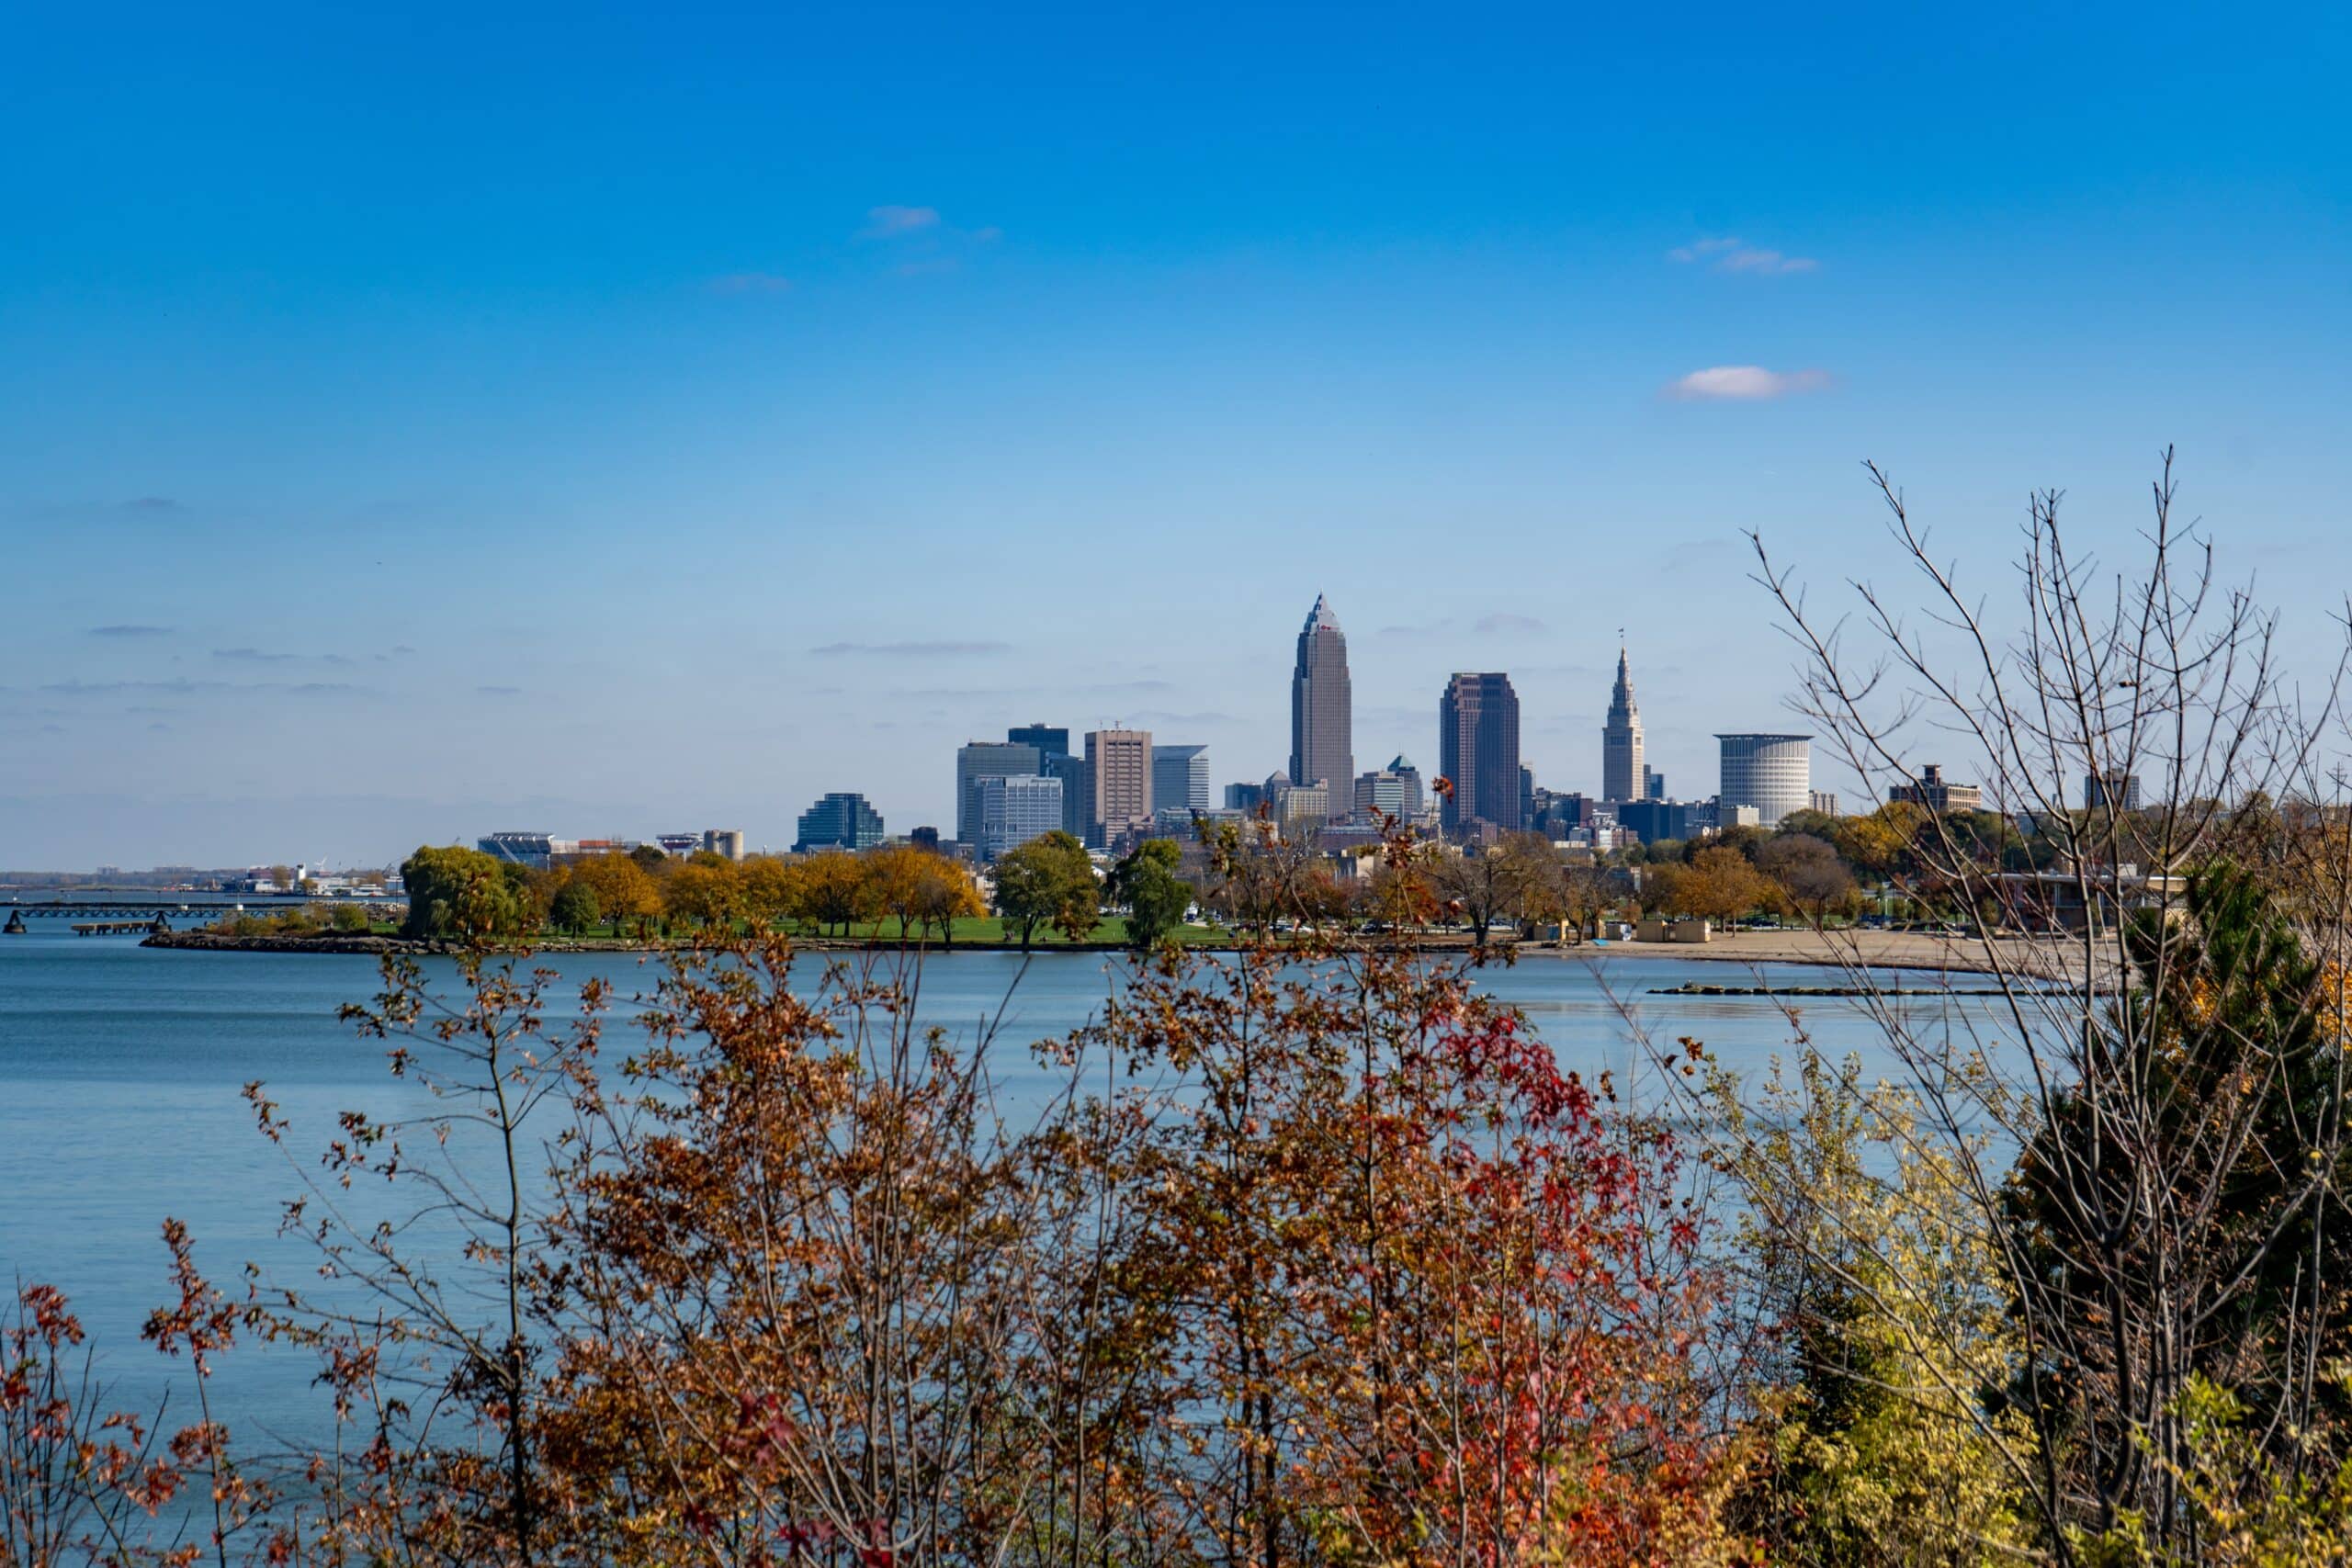 The skyline of cleveland, ohio is seen from the water.